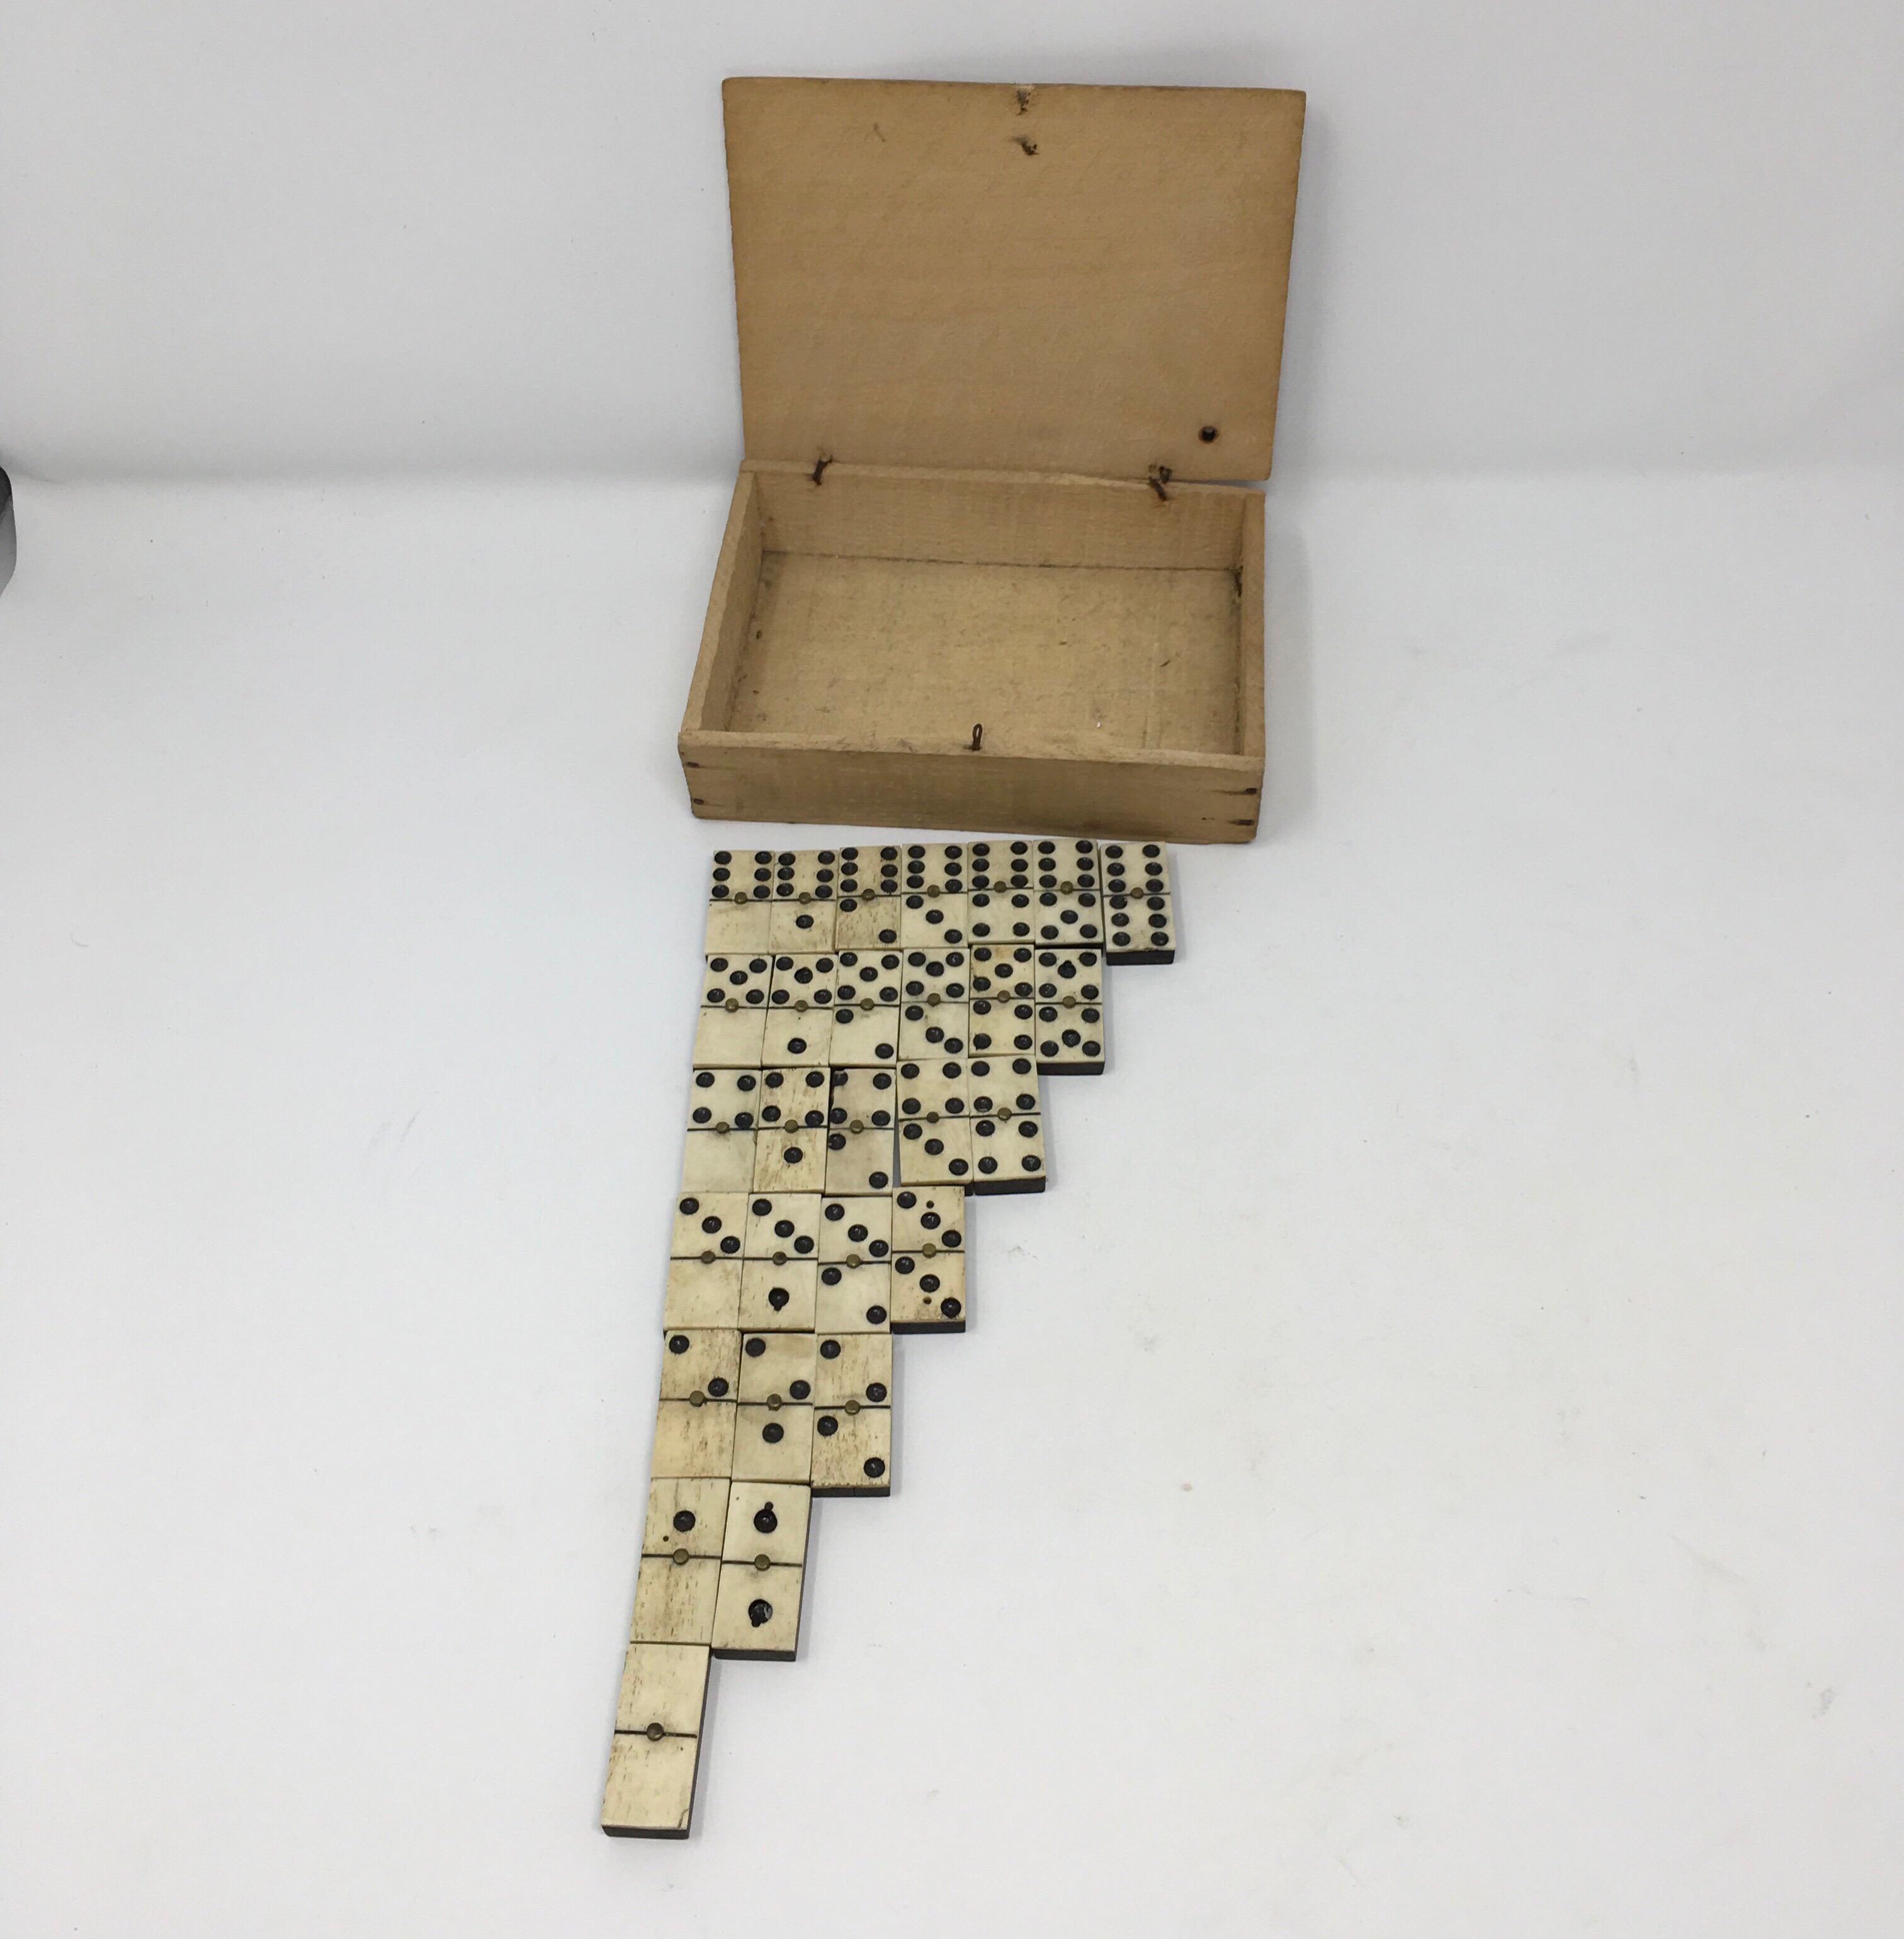 Found at a small market in Southern France, this antique domino set is sure to delight. The set of 28 dominos are presented as found in an old wood box measuring: 6.25